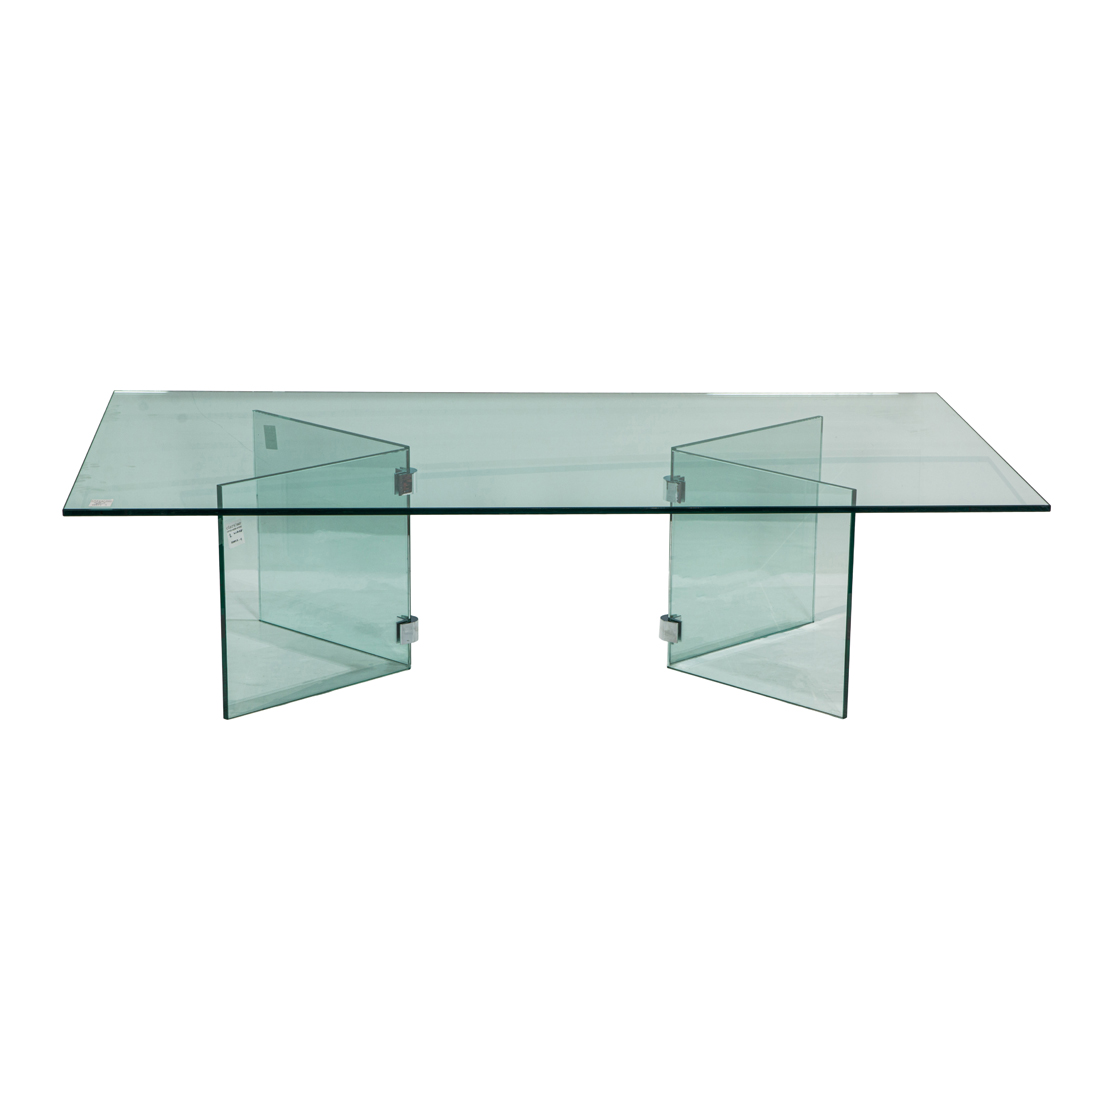 A PACE STYLE GLASS TOP COFFEE TABLE